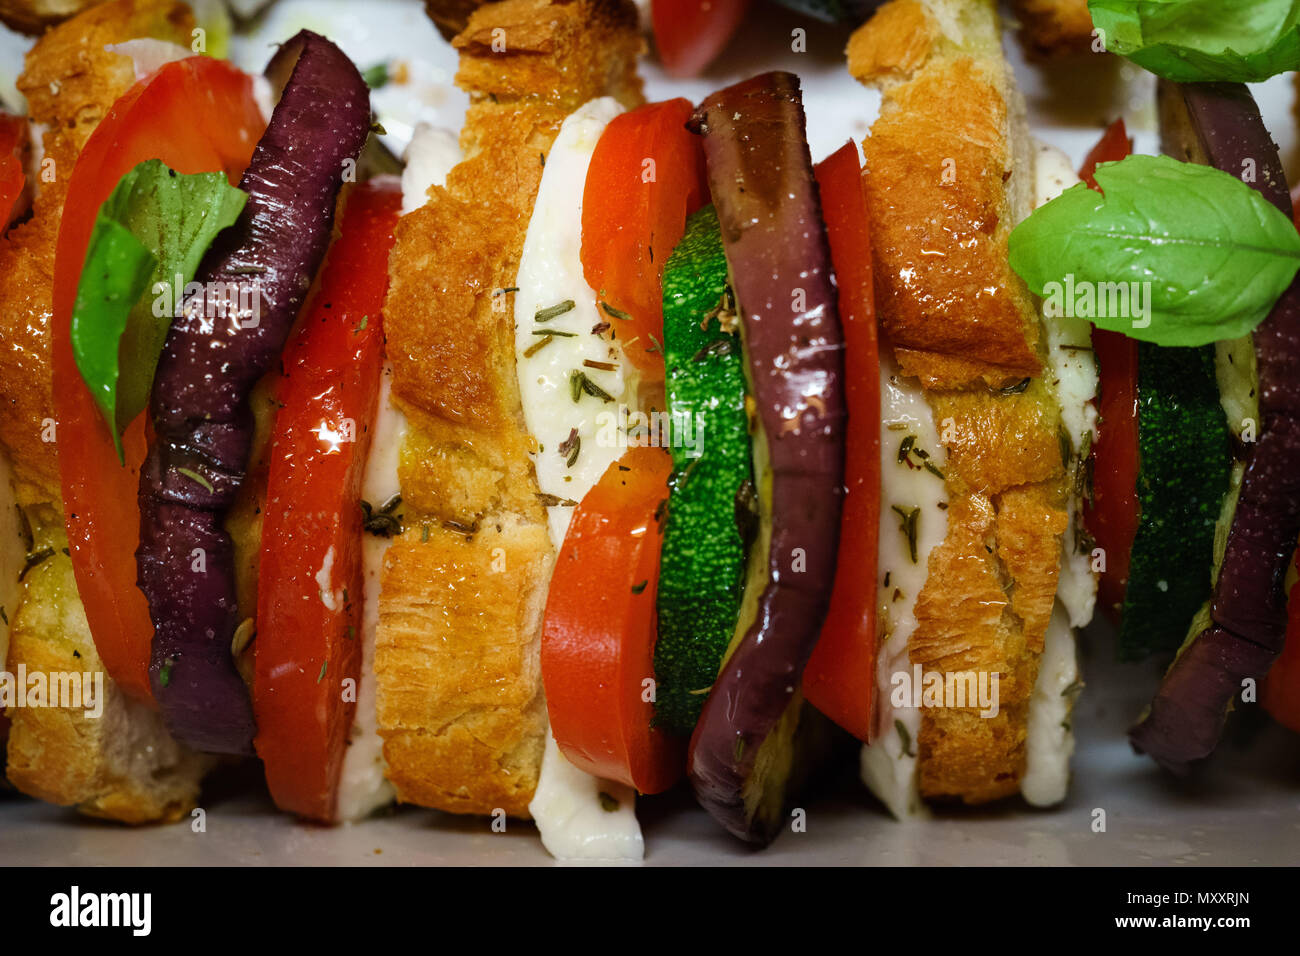 Flat lay top view of oven baked sliced vegetables (tomatoes, aubergines and courgettes) with mozzarella cheese and baguette slices dressed with basil. Stock Photo